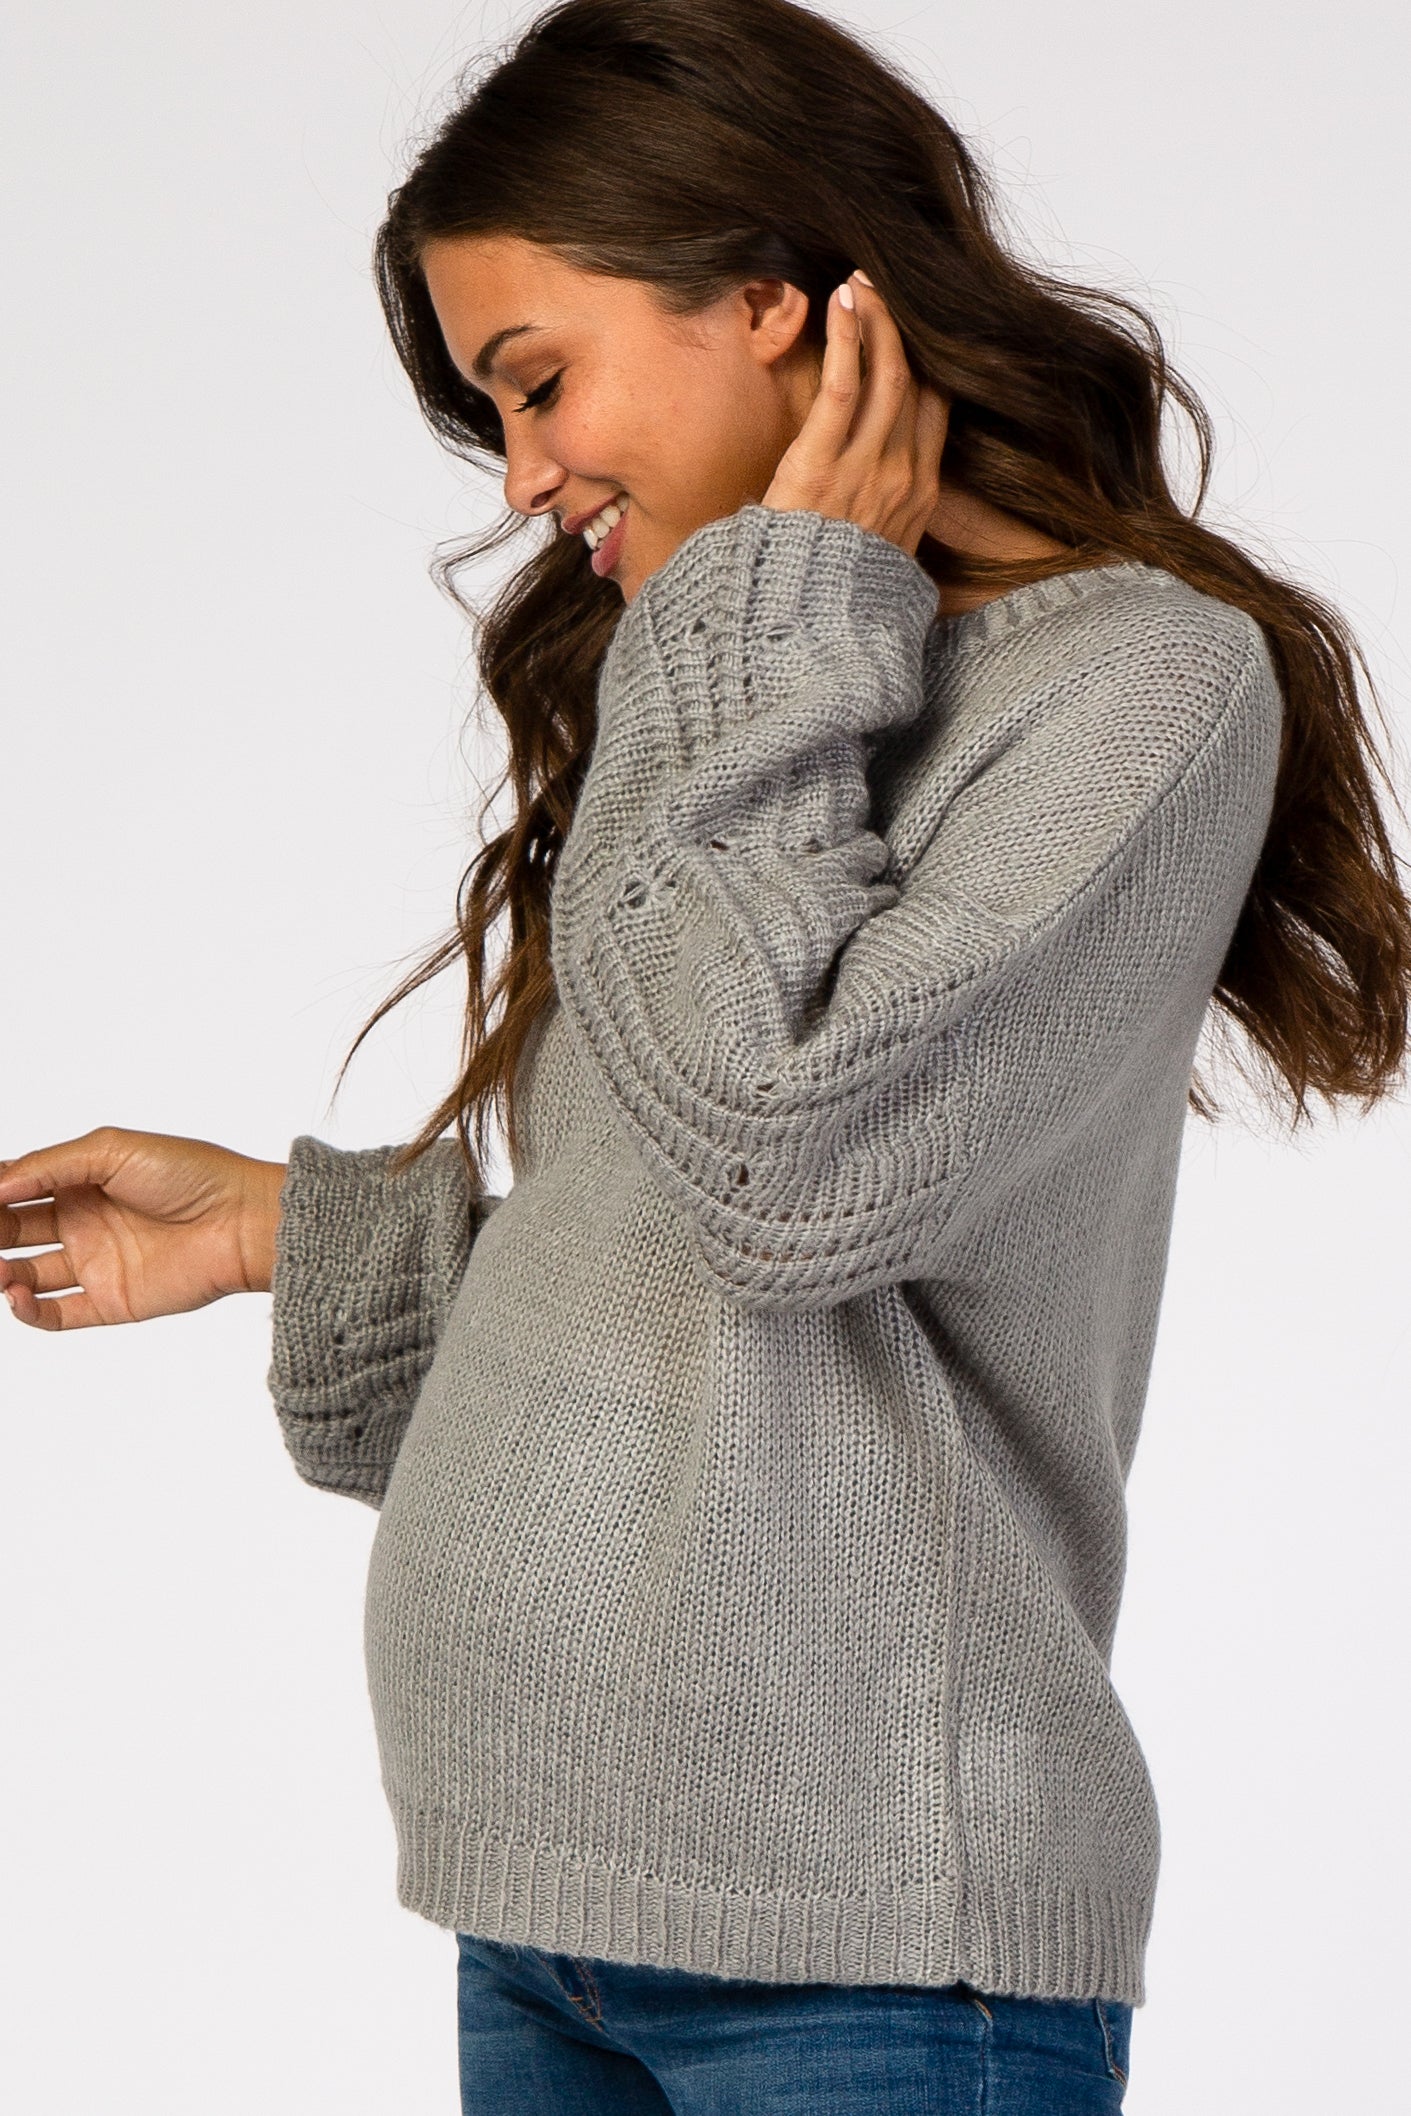 Heather Grey Cable Knit Puff Sleeve Maternity Sweater